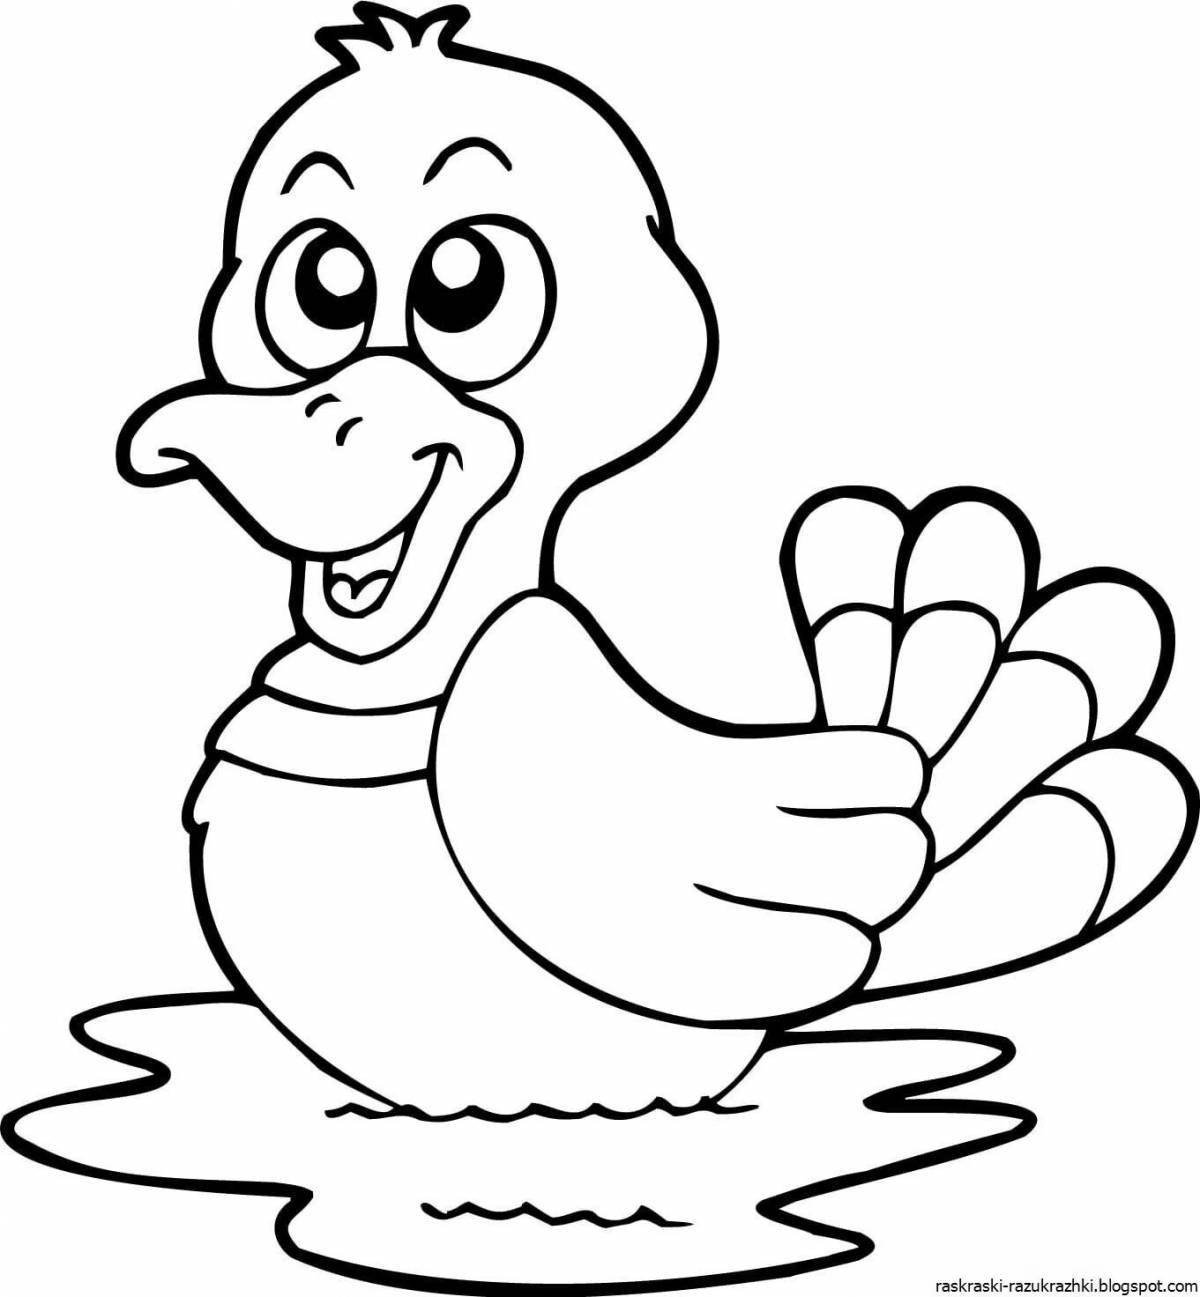 Colorful duck coloring book for 3-4 year olds